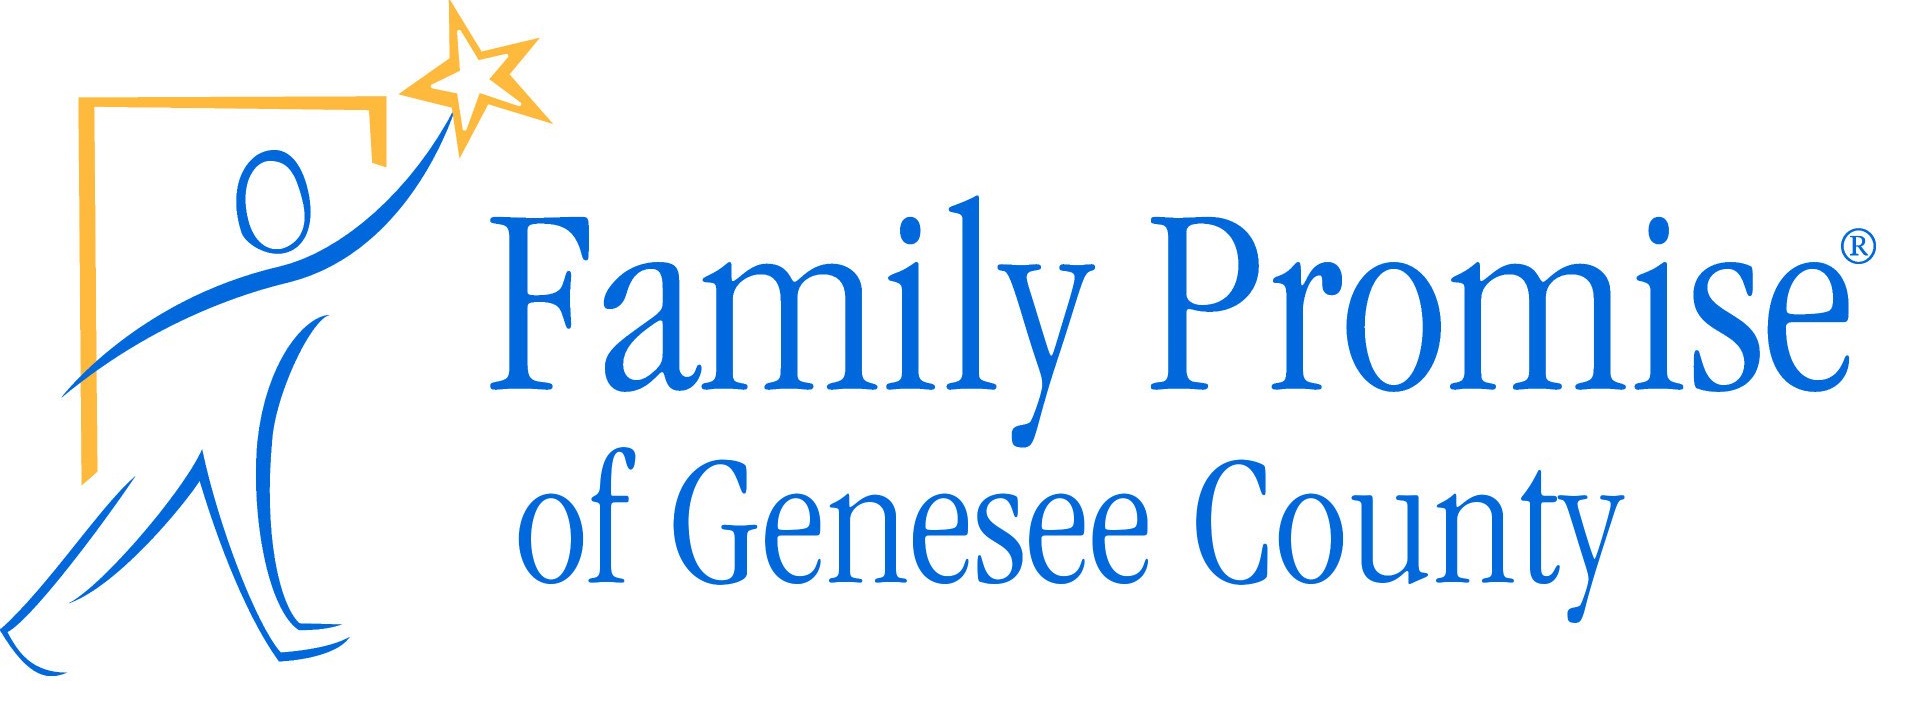 Family Promise of Genesee County